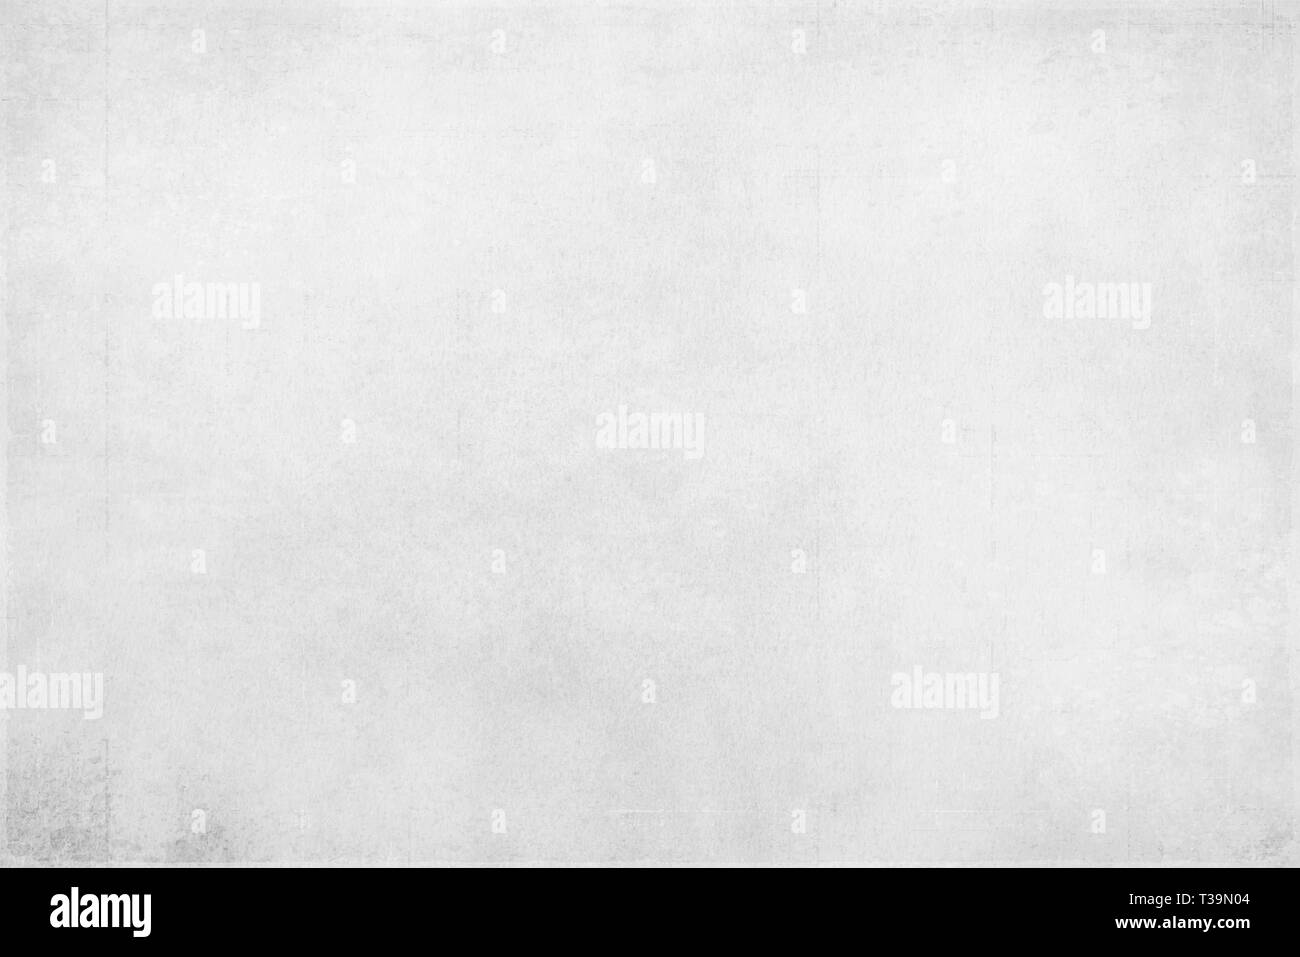 Monochrome texture with white and gray color. It is a concept, conceptual or metaphor wall banner, grunge, material, aged, rust or construction. Stock Photo